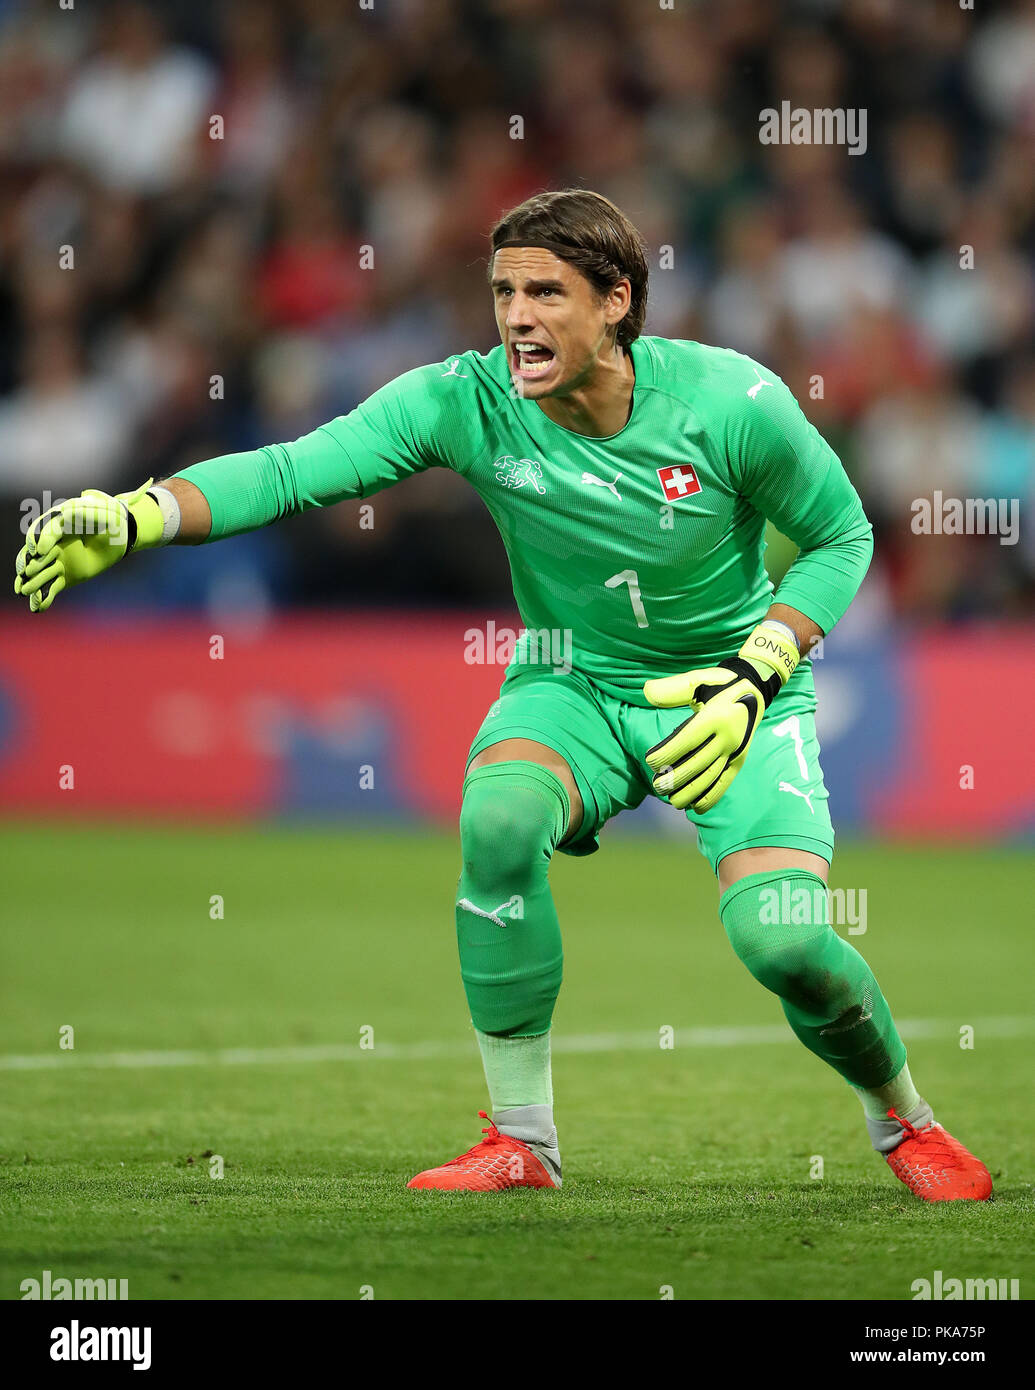 Switzerland goalkeeper Yann Sommer during the International Friendly at The King Power Stadium, Leicester. PRESS ASSOCIATION Photo. Picture date: Tuesday September 11, 2018. See PA story SOCCER England. Photo credit should read: Nick Potts/PA Wire. Stock Photo